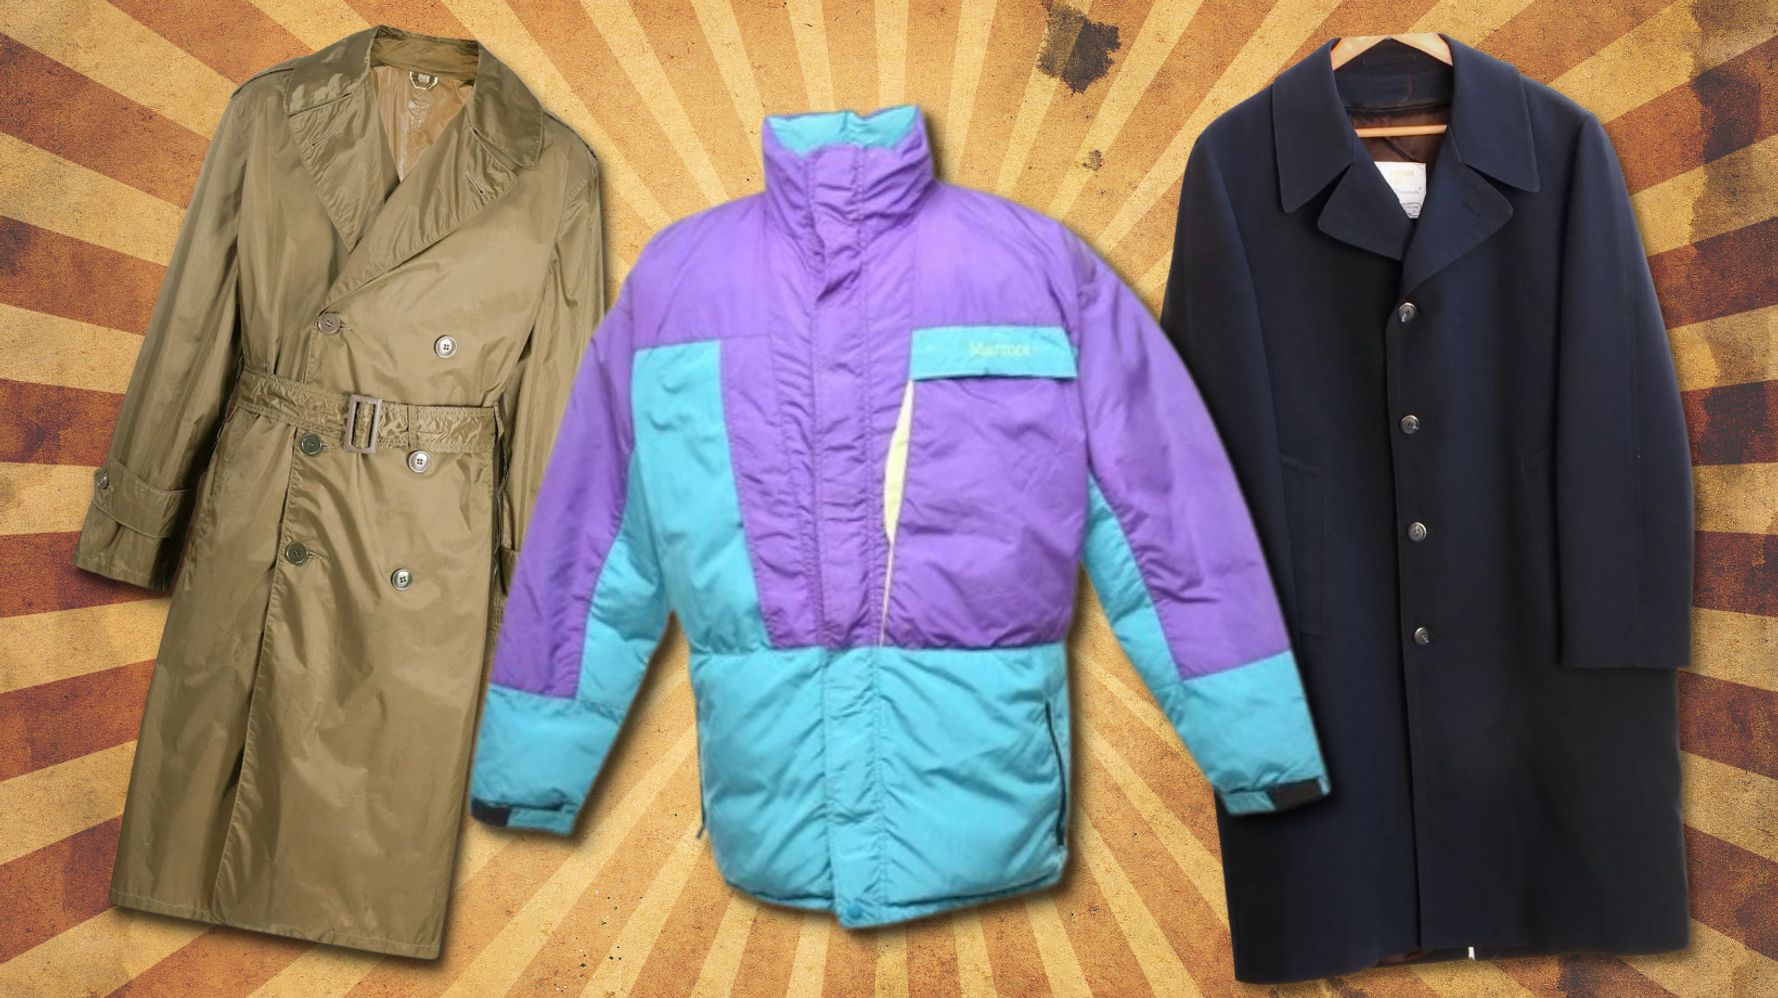 Where To Buy Men's Retro And Vintage-Inspired Jackets | HuffPost Life